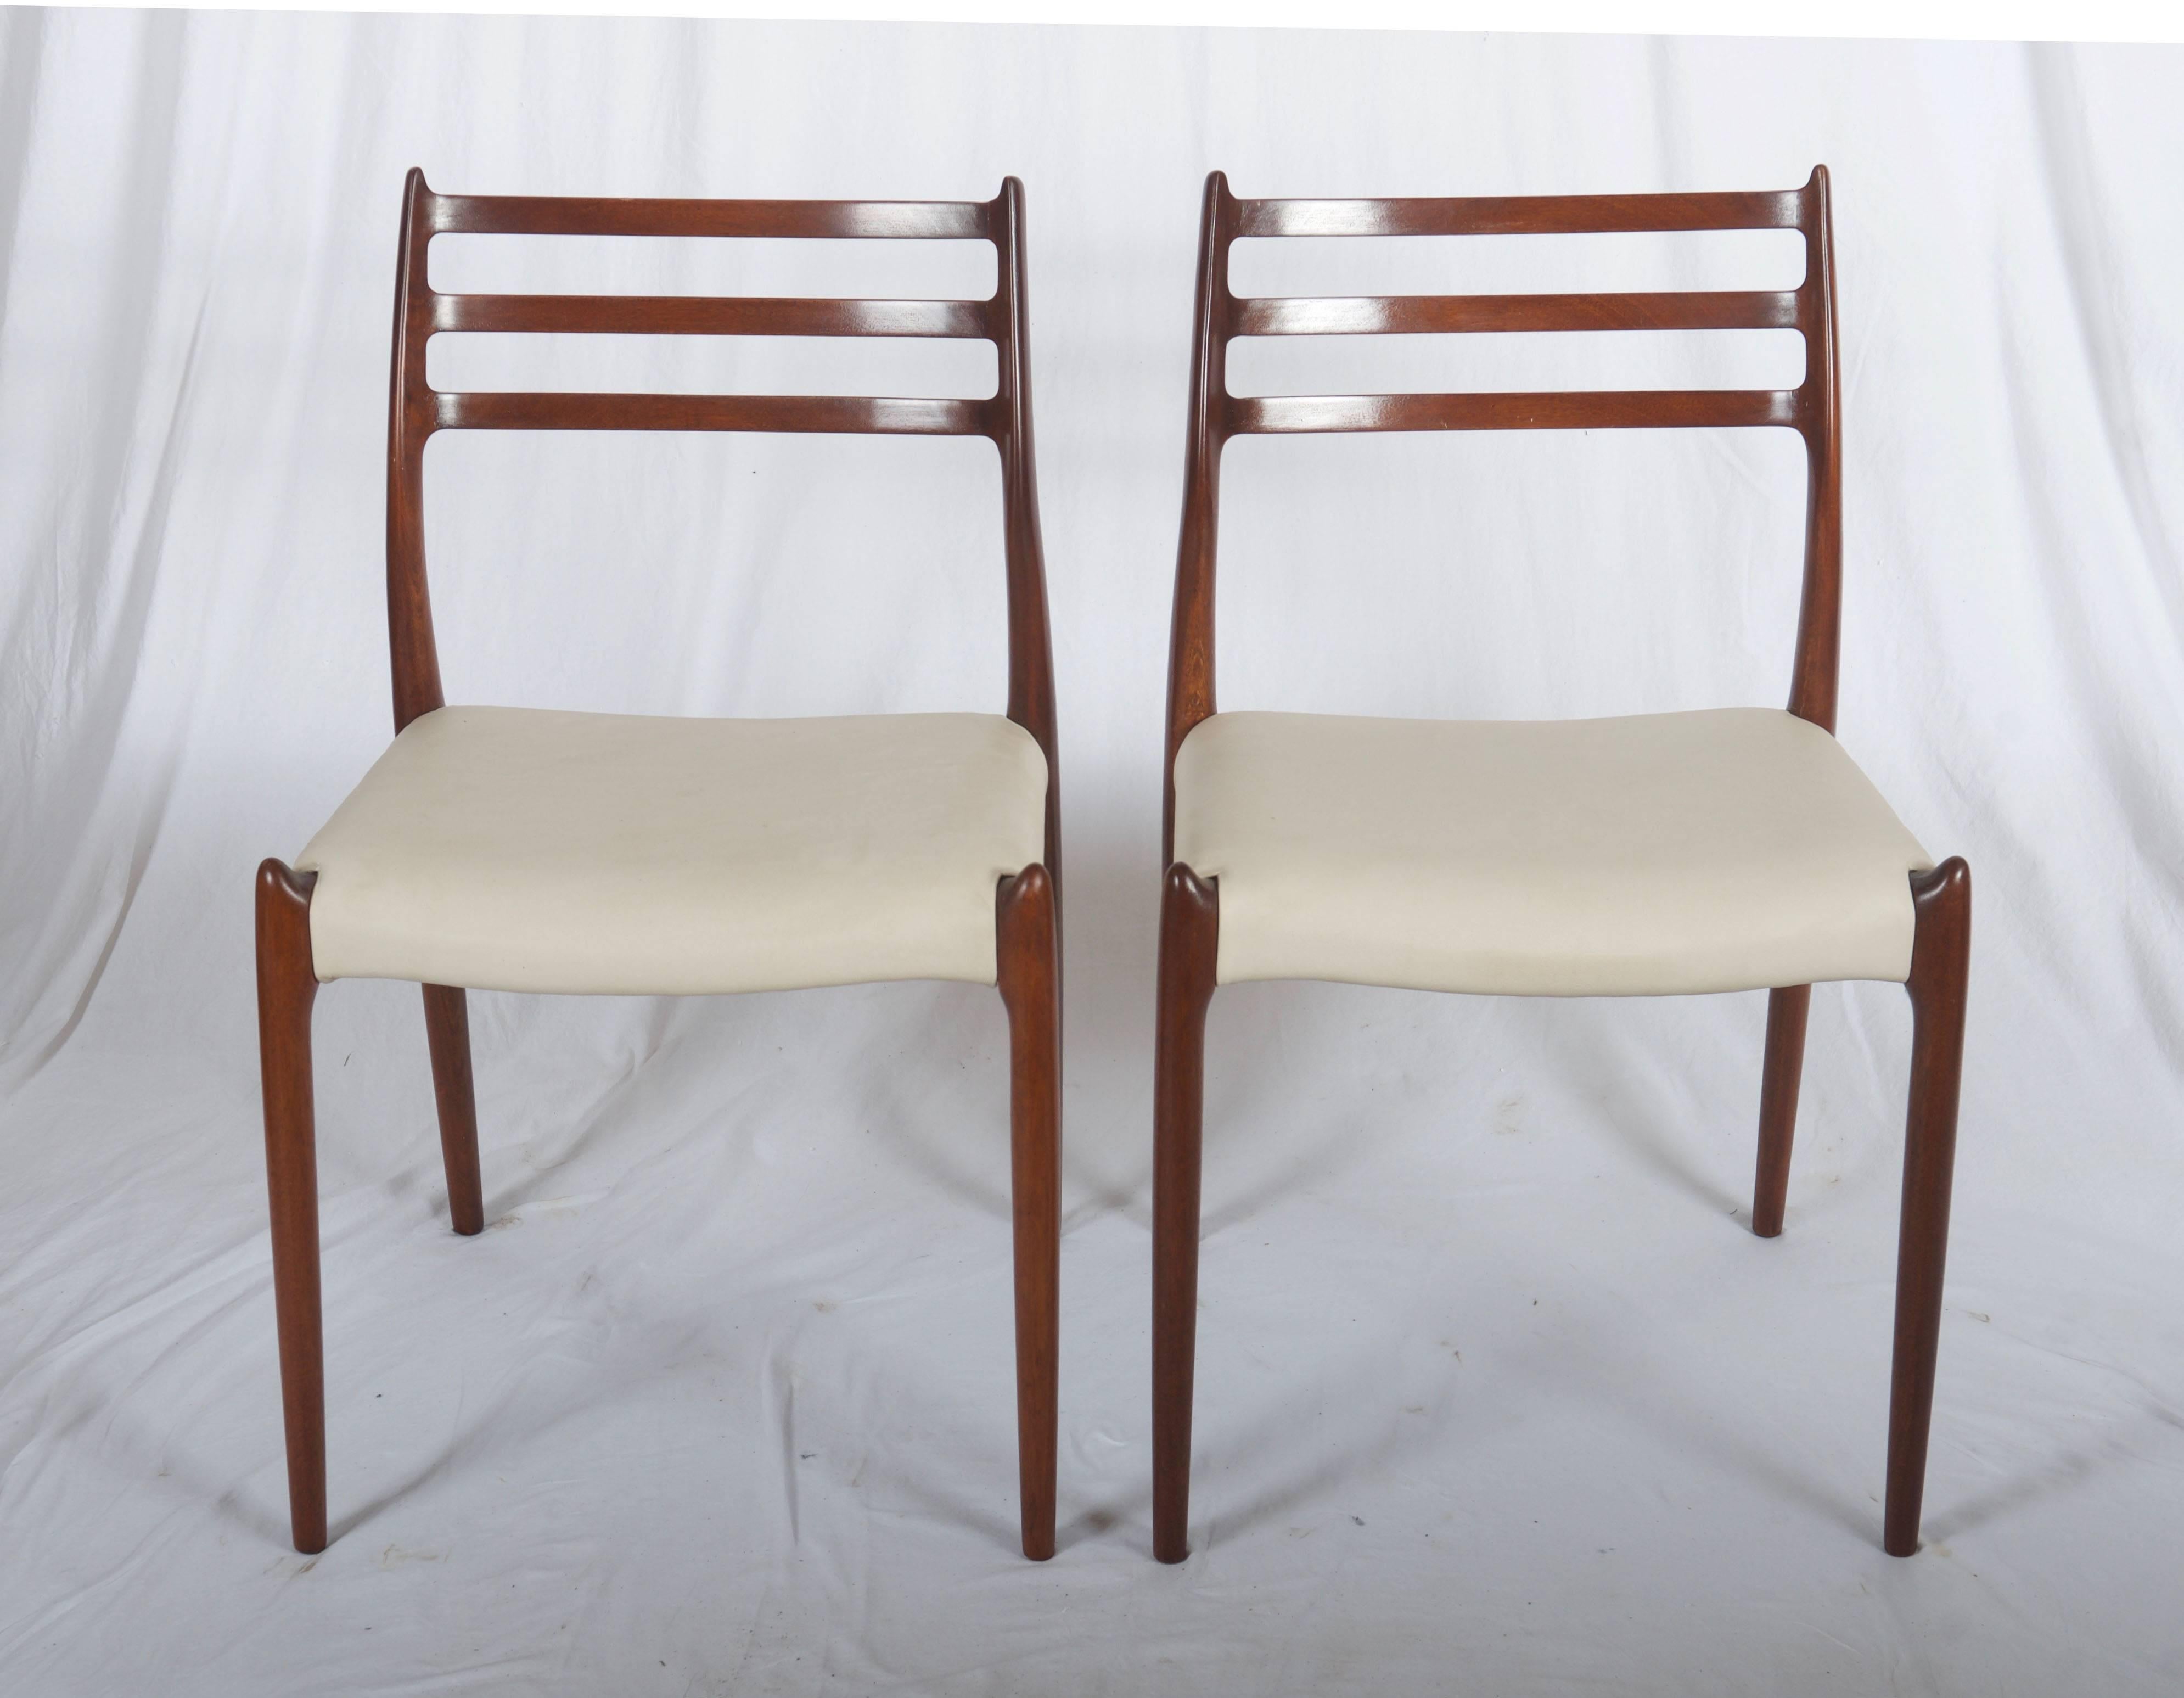 Dining chairs made of solid teak, designed in the 1950s by Niels Otto Møller and produced by J. L. Møller Møbelfabrik, model number 78. Fully restored, wood surface glossy finish with new fabric leather upholstered seat. Delivery time about 2